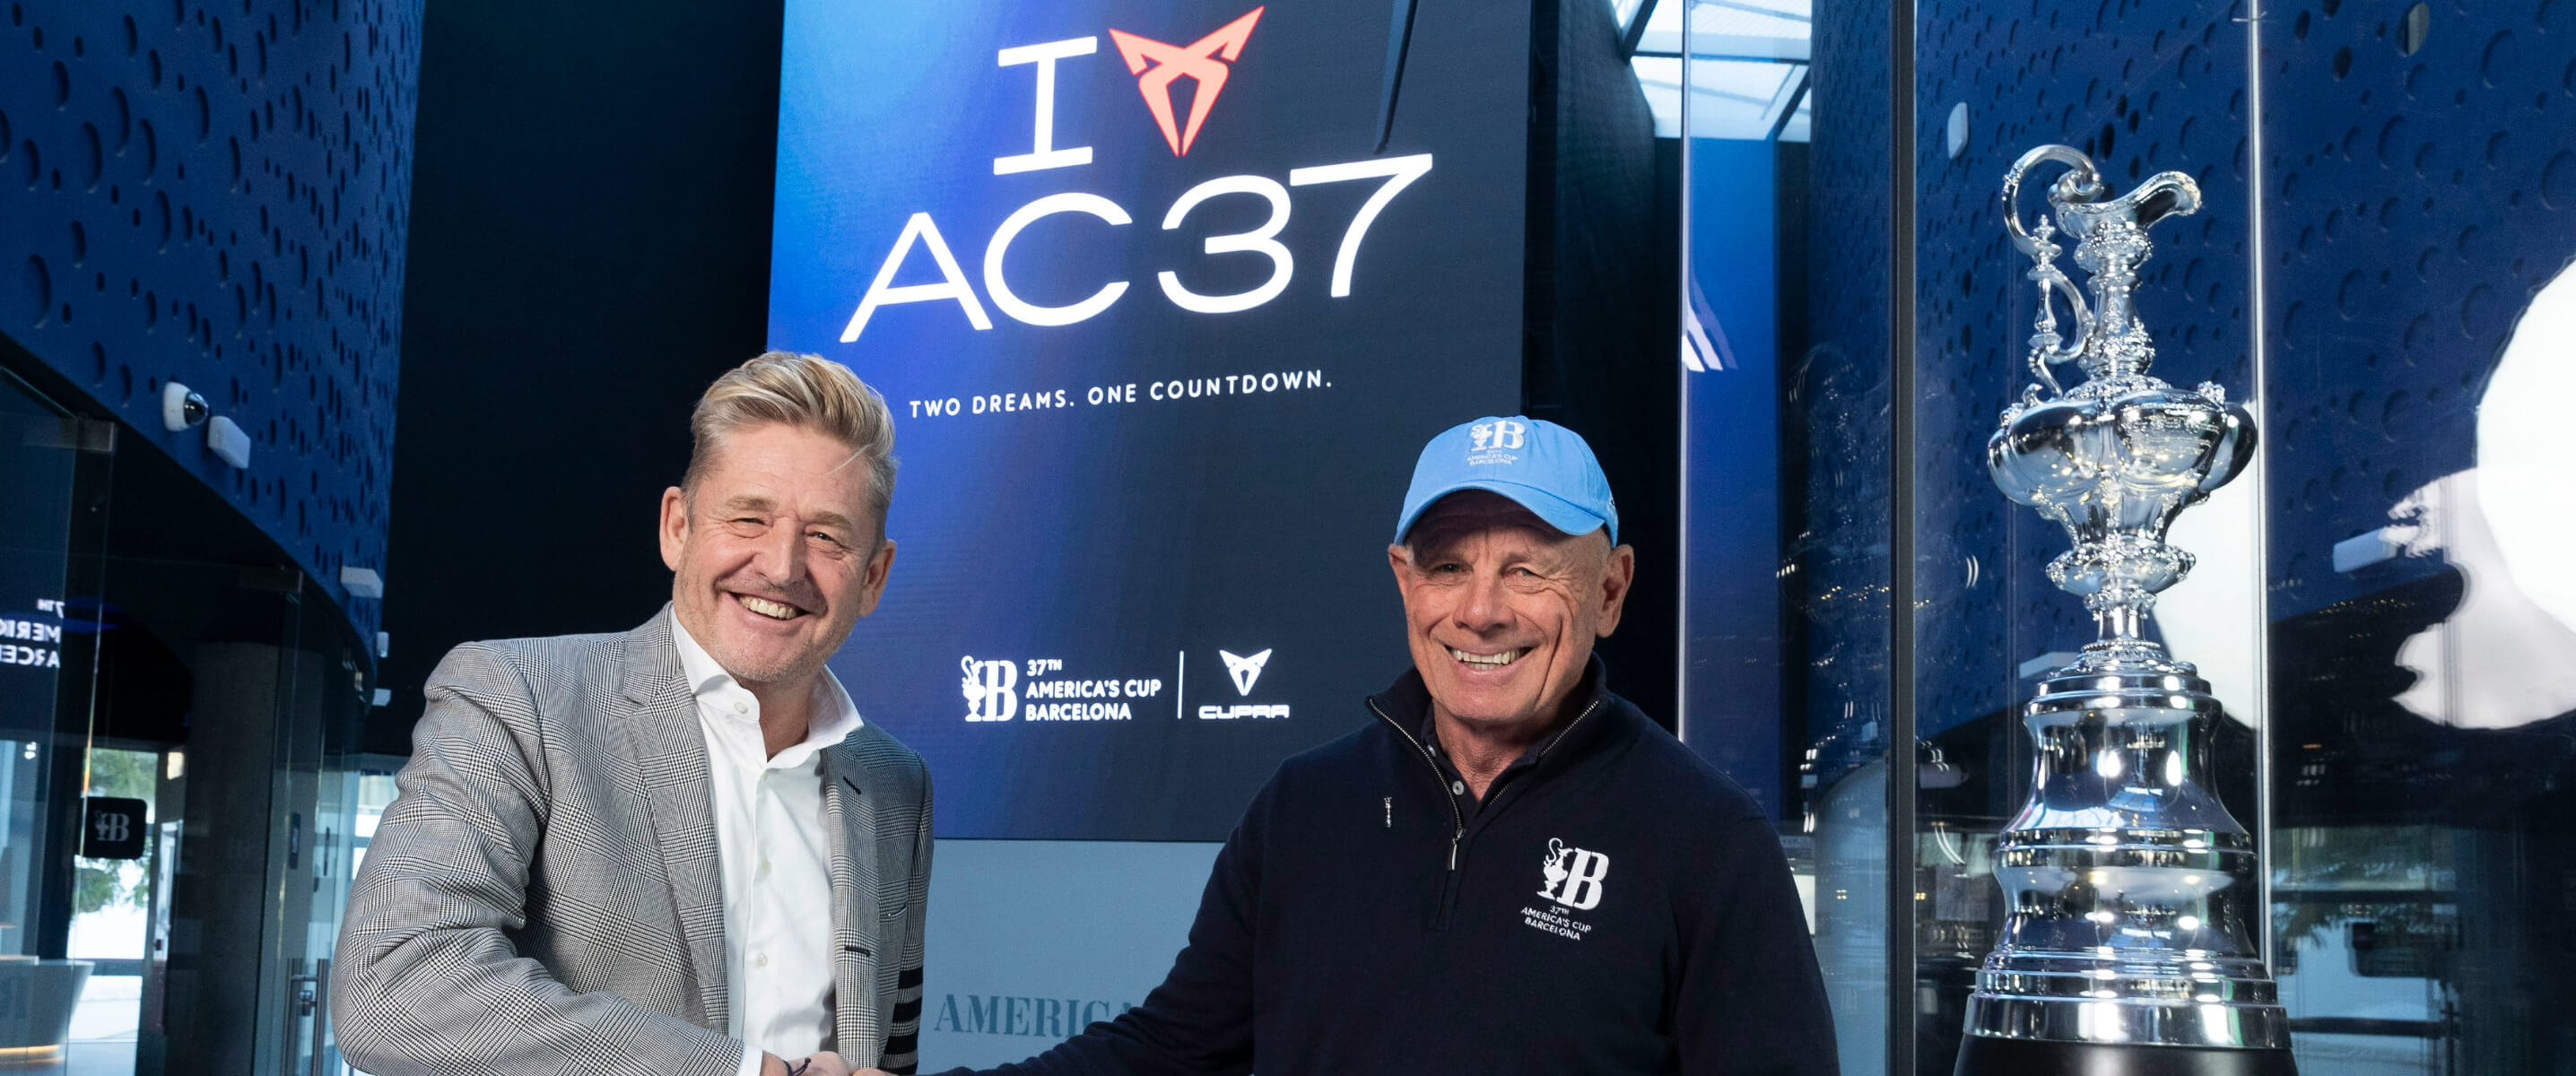 CUPRA and the America’s Cup join forces